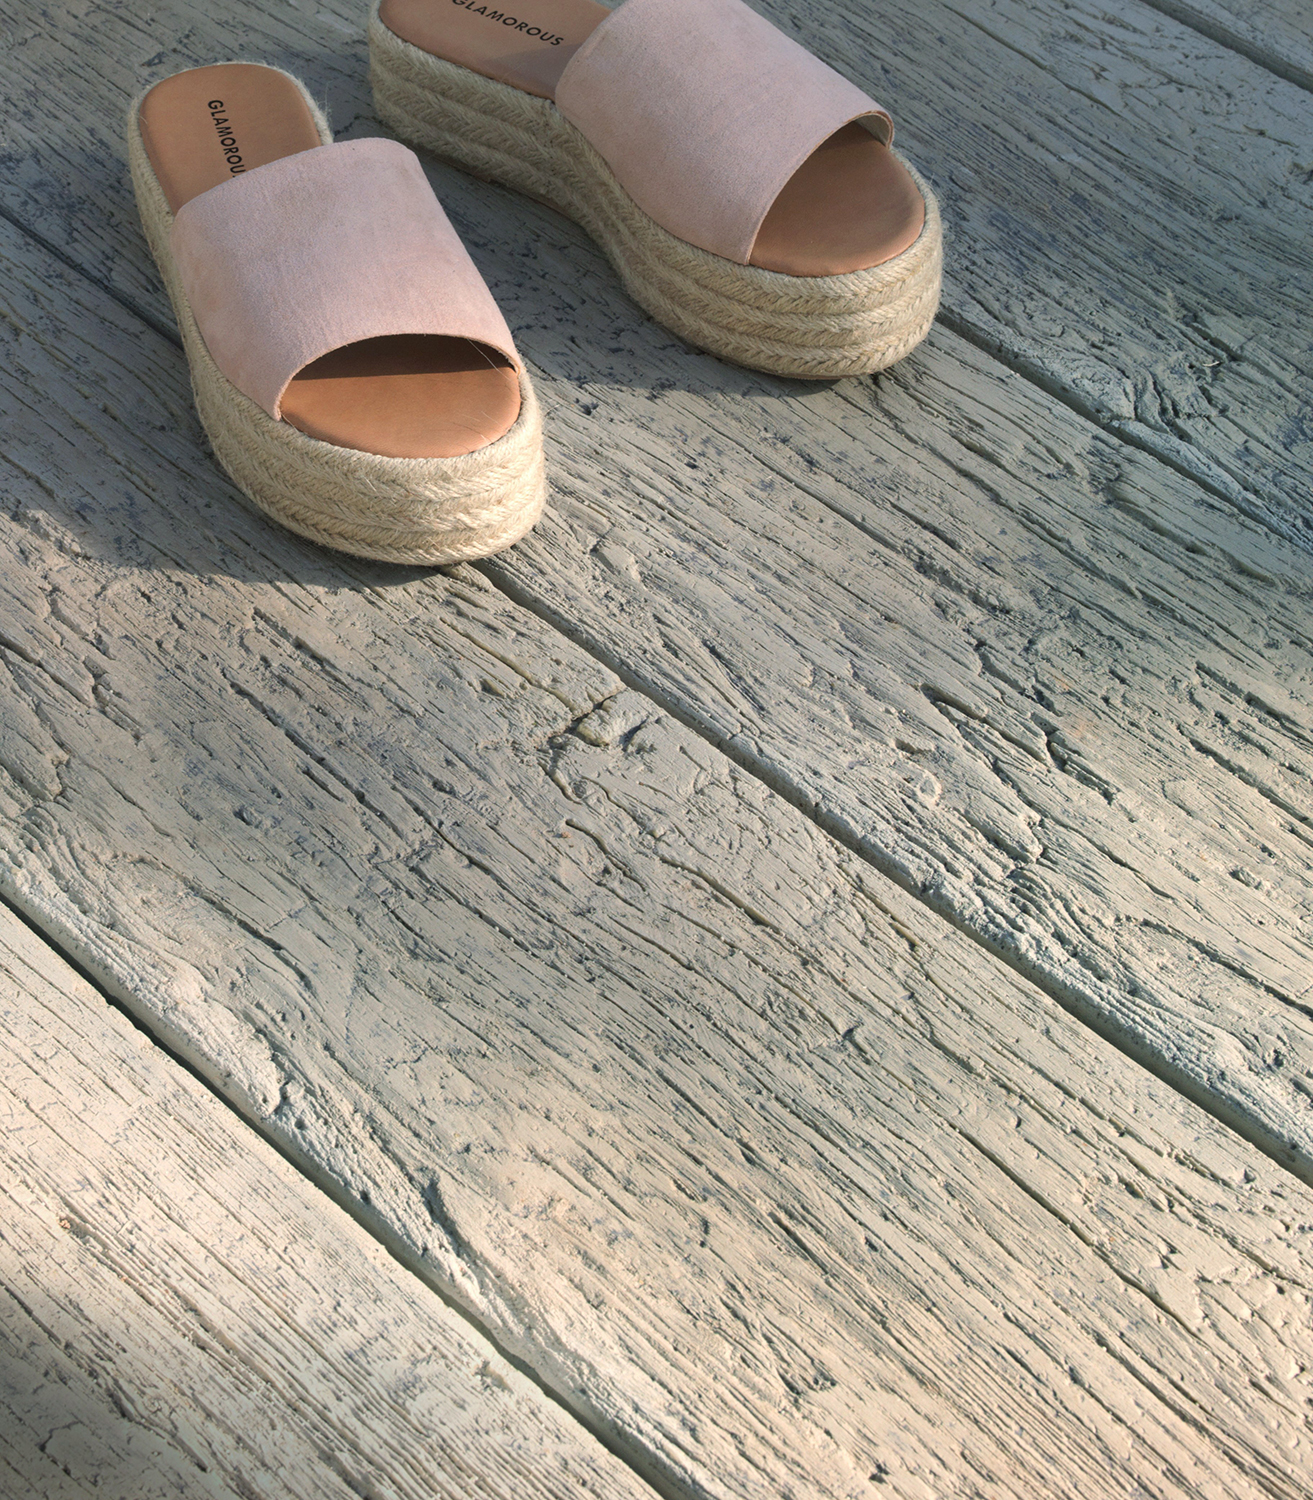 Millboard's decking enhances outdoor space for residential property